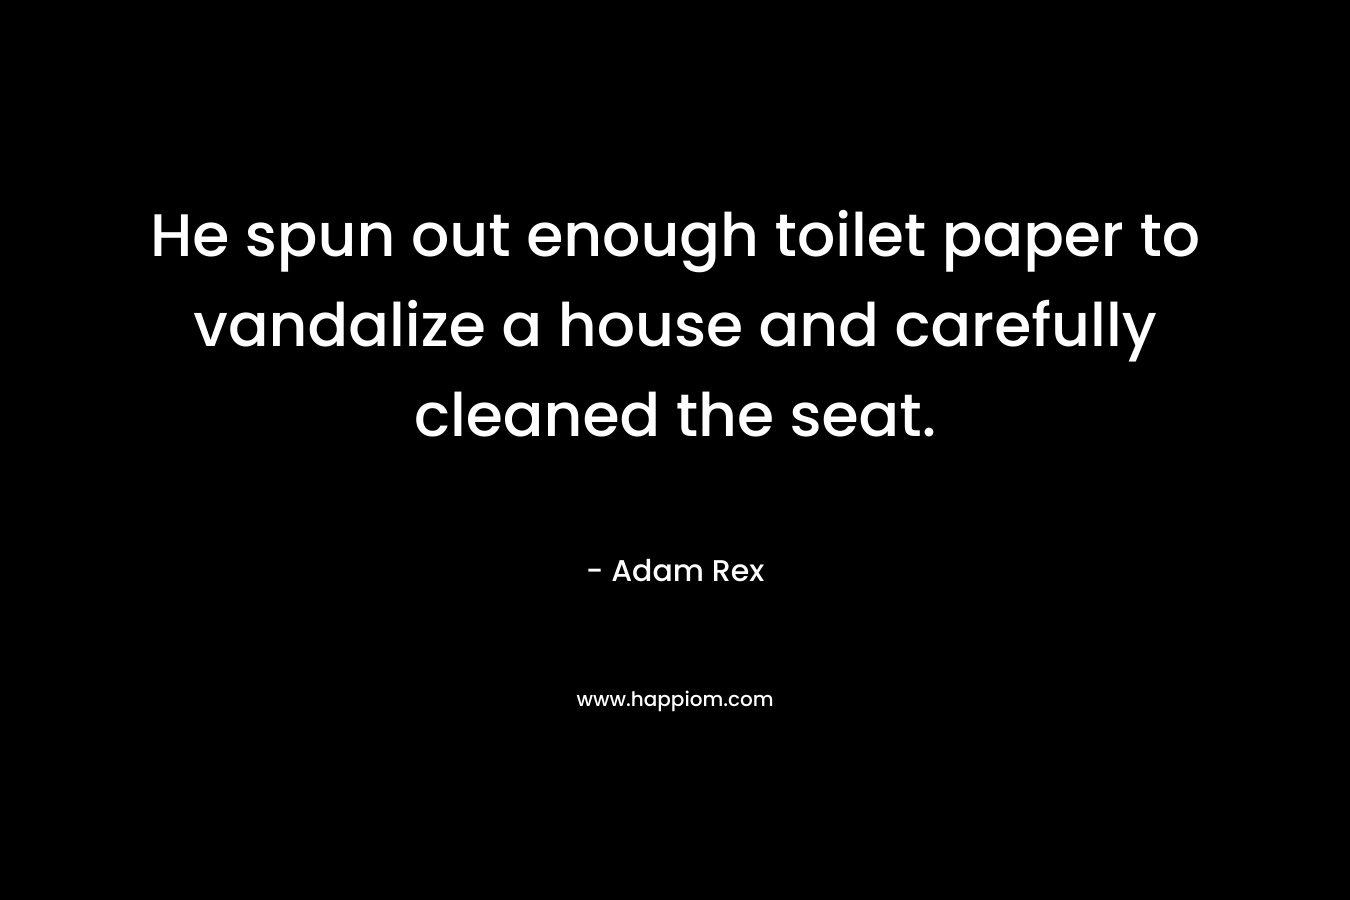 He spun out enough toilet paper to vandalize a house and carefully cleaned the seat.